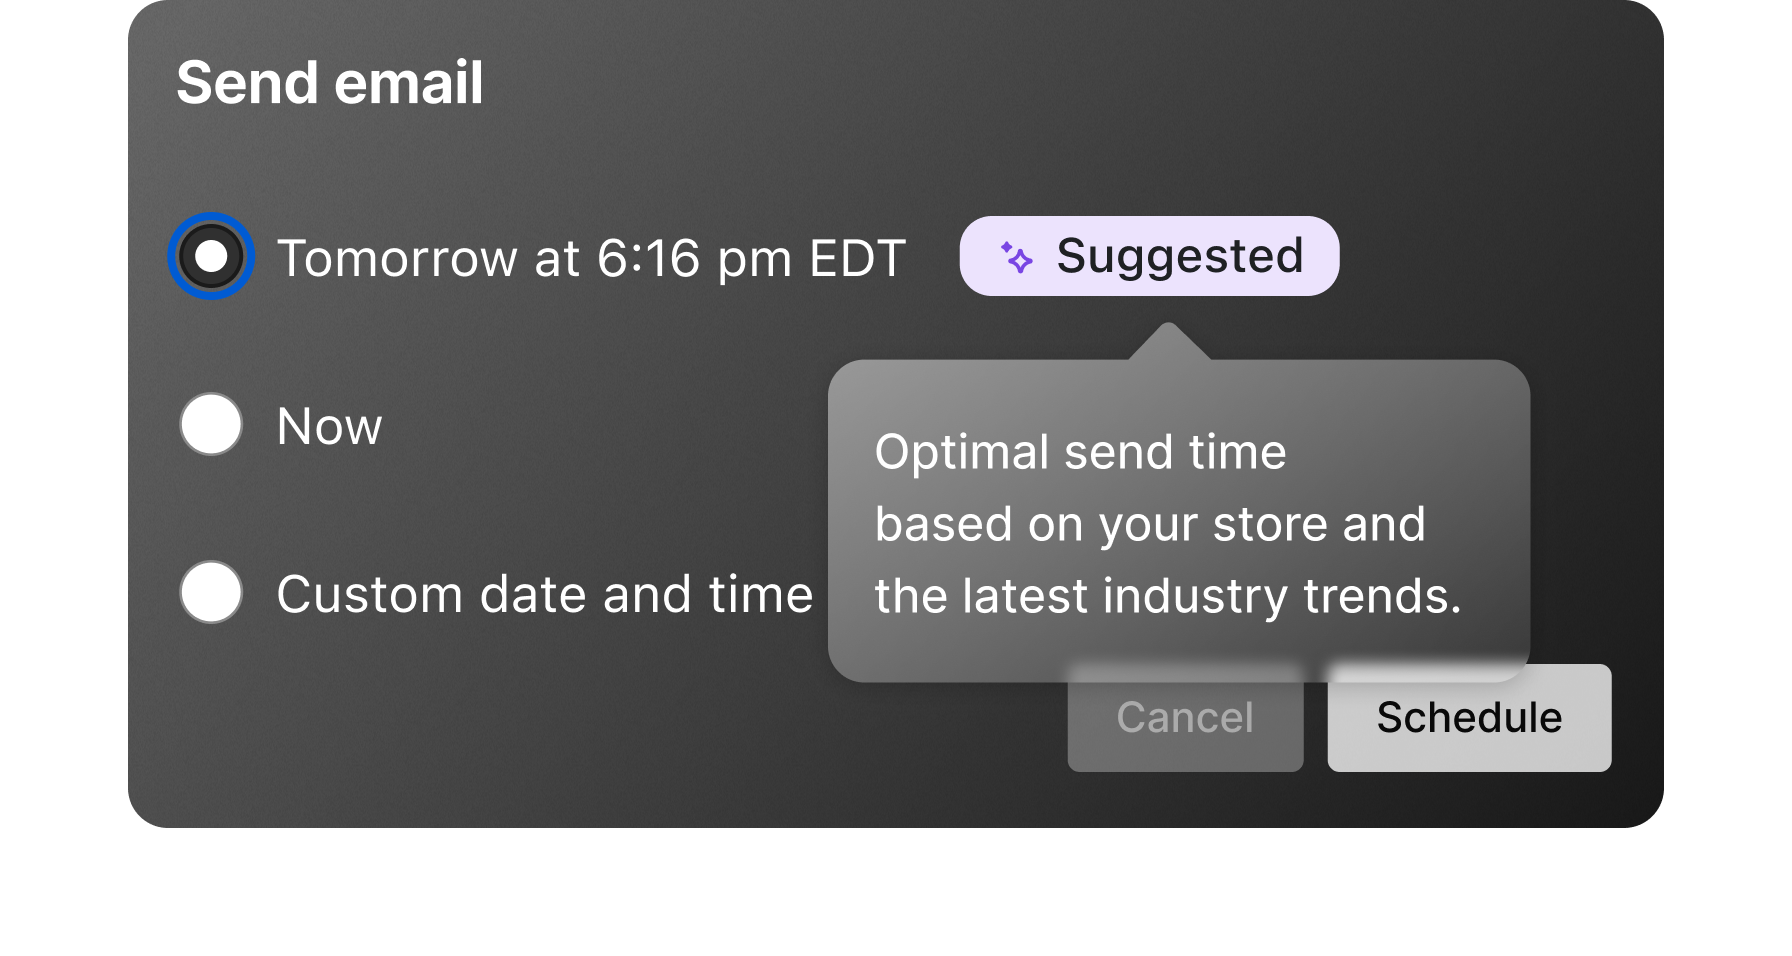 There are three choices for the merchant to schedule emails. The first choice, powered by Shopify AI, suggests sending the email tomorrow based on recent trends. The second choice is to send it now. The third choice allows the merchant to decide the date and time.